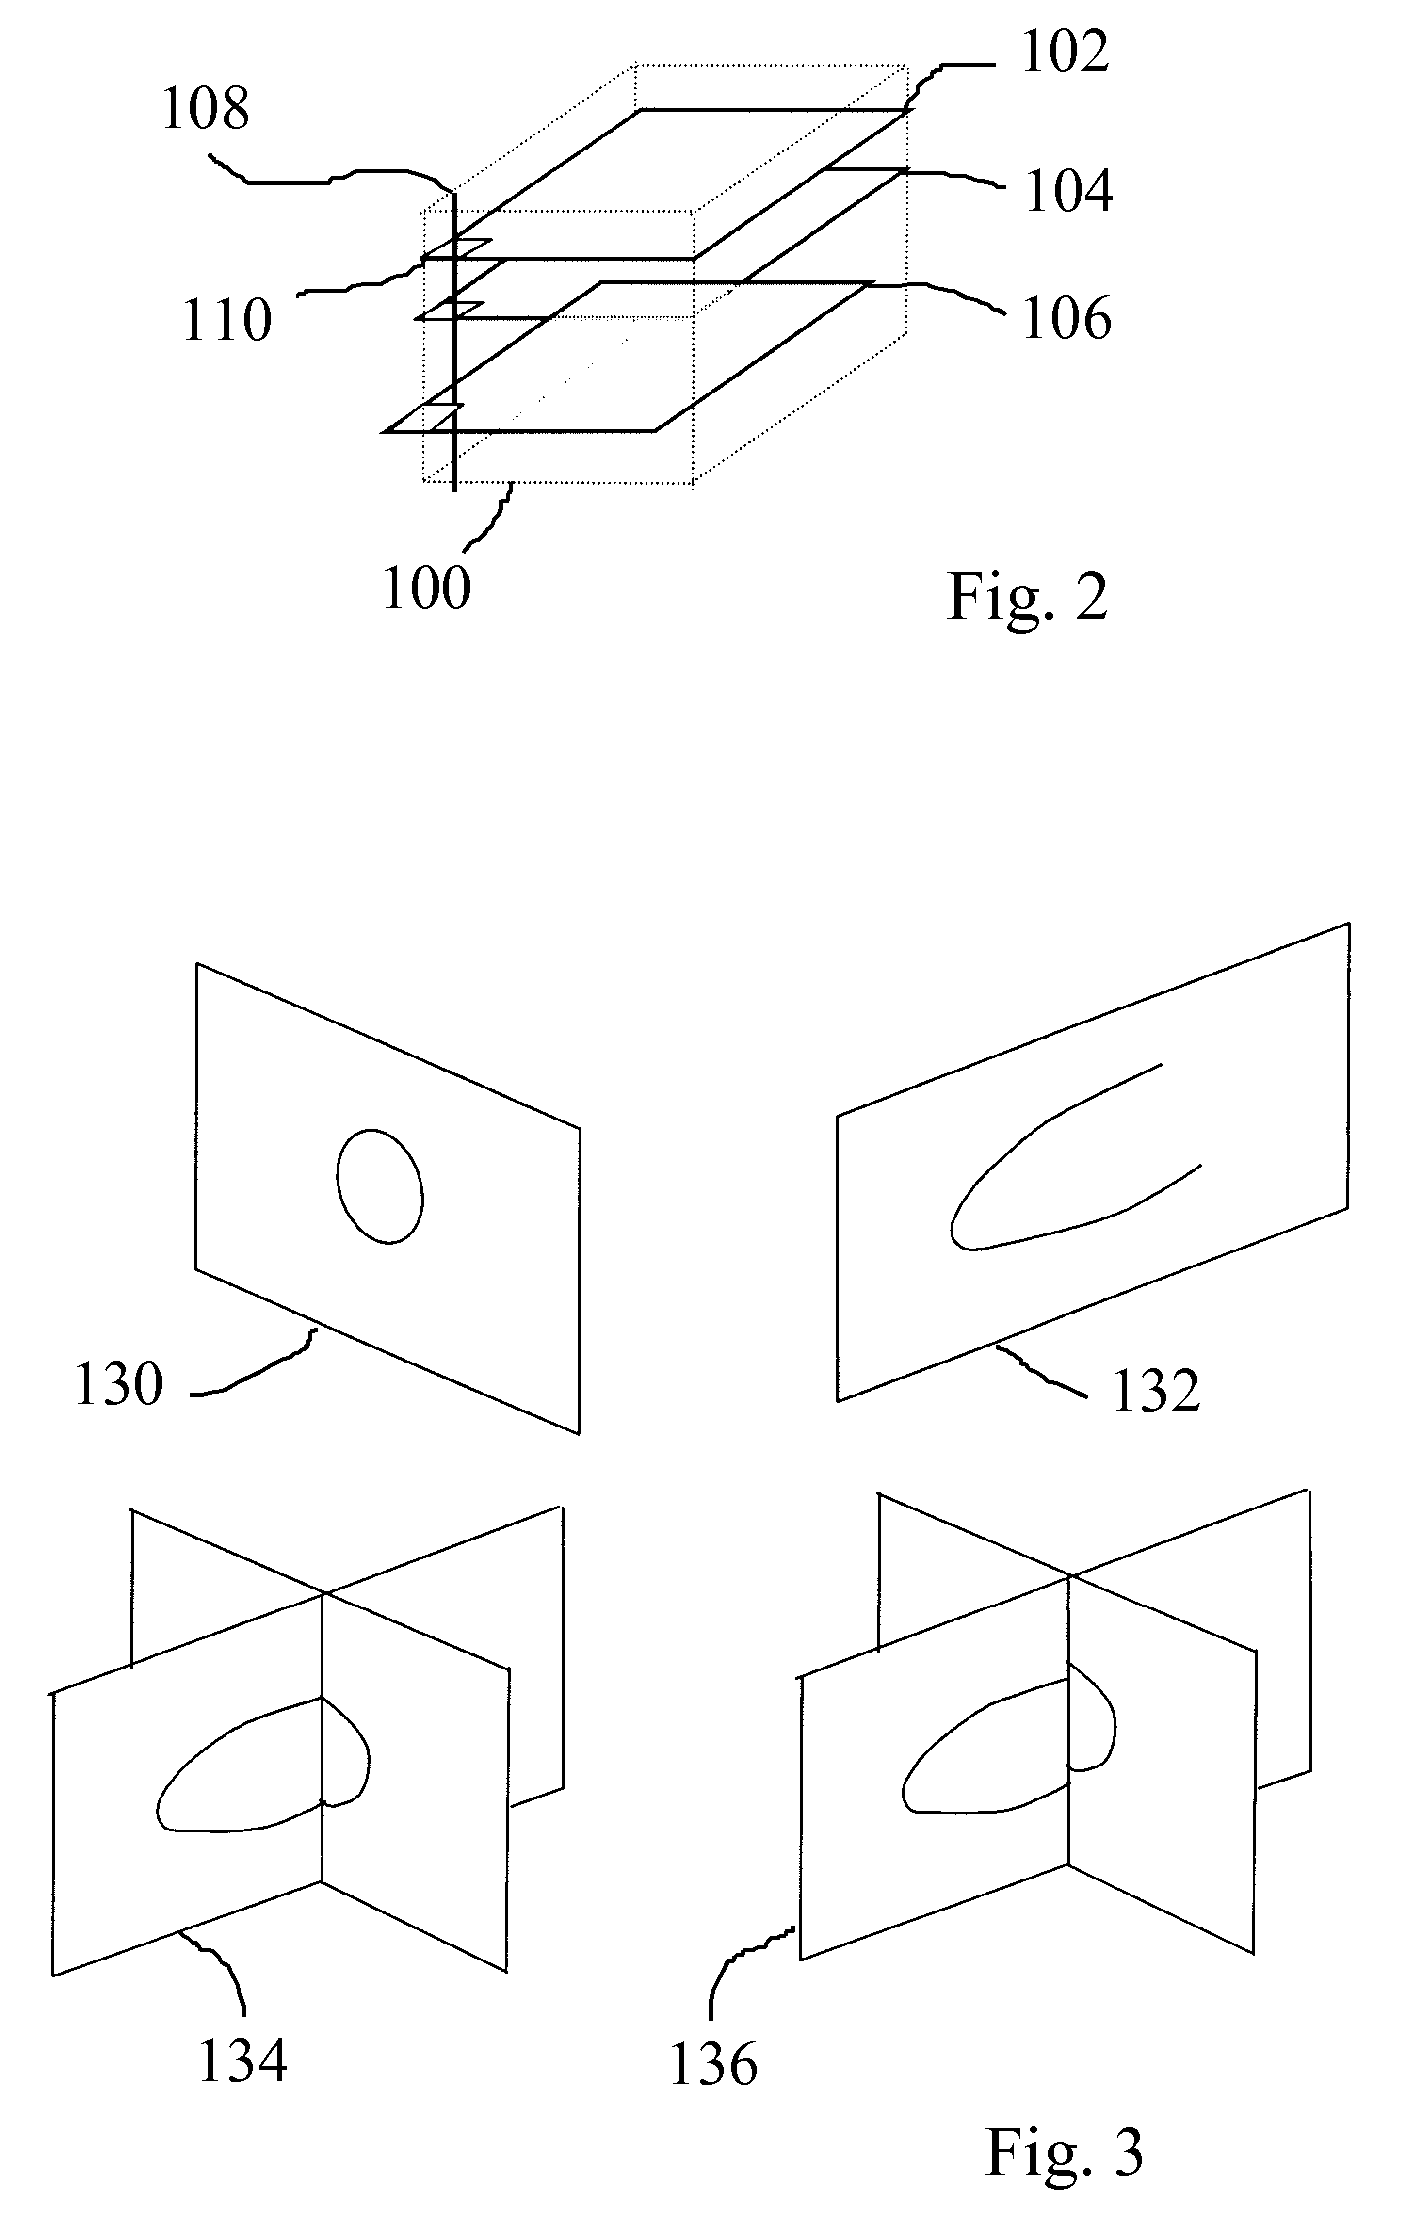 Method, apparatus and computer program product for automatic segmenting of cardiac chambers